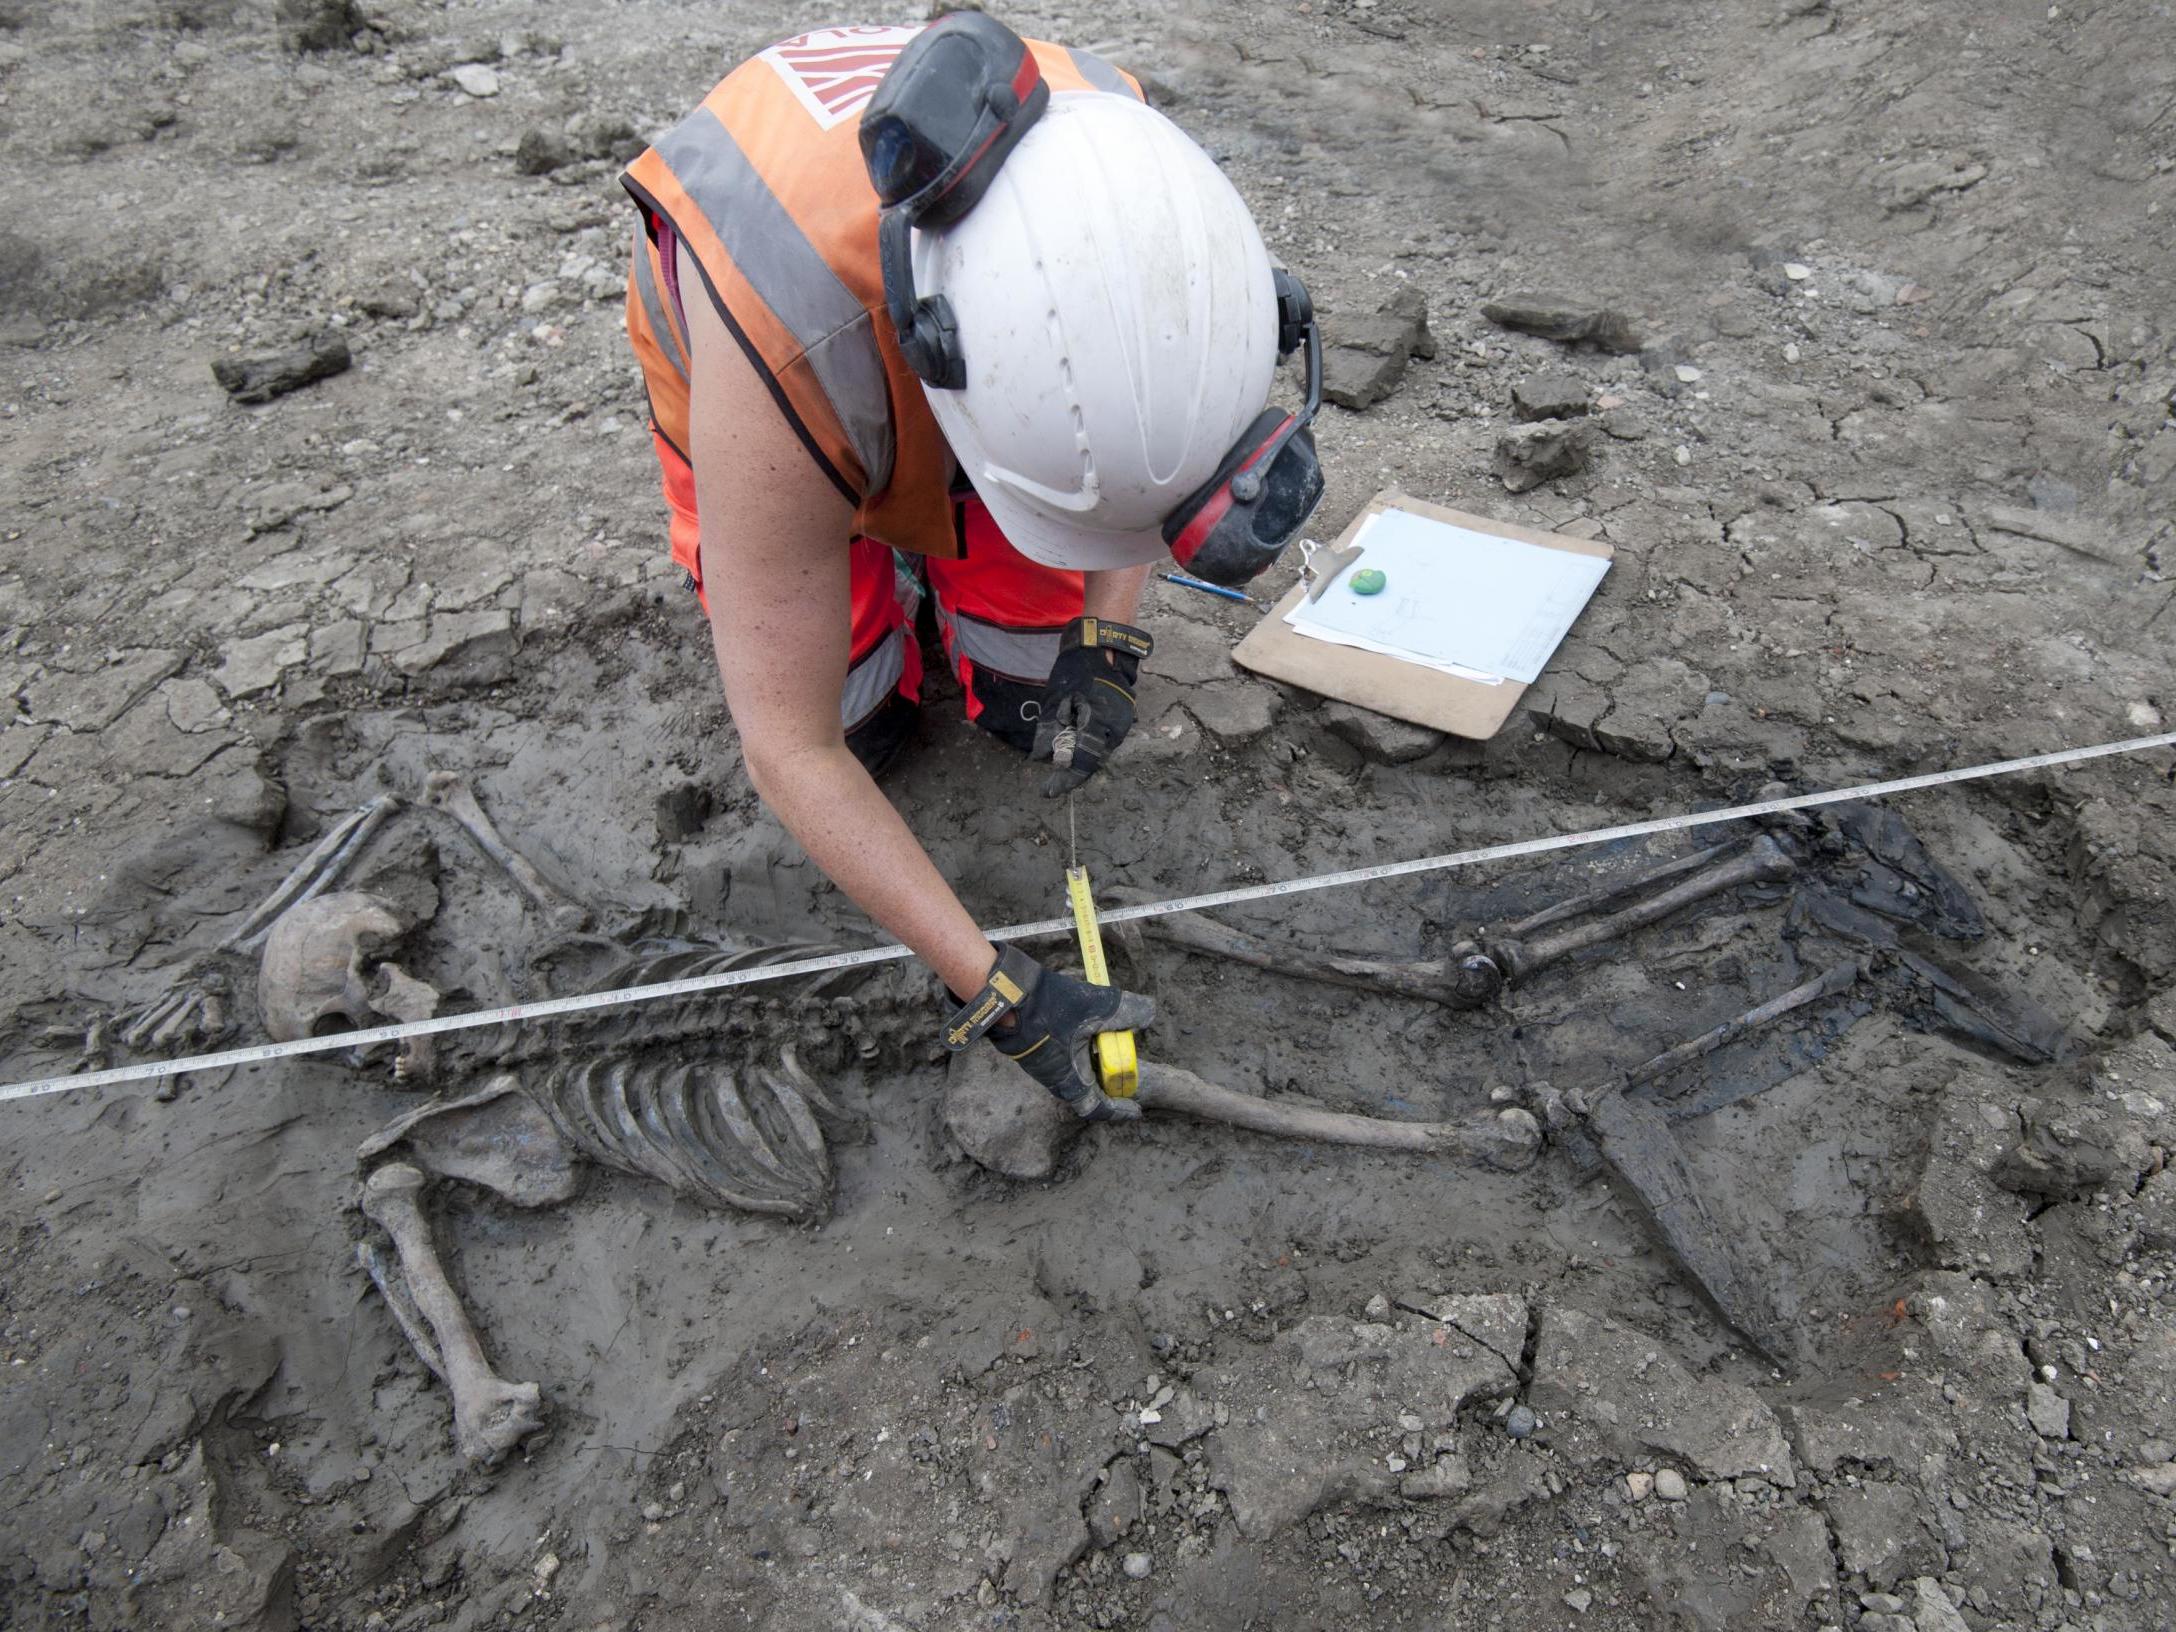 Archaeologists found the skeleton of a man thought to have died about 500 years ago